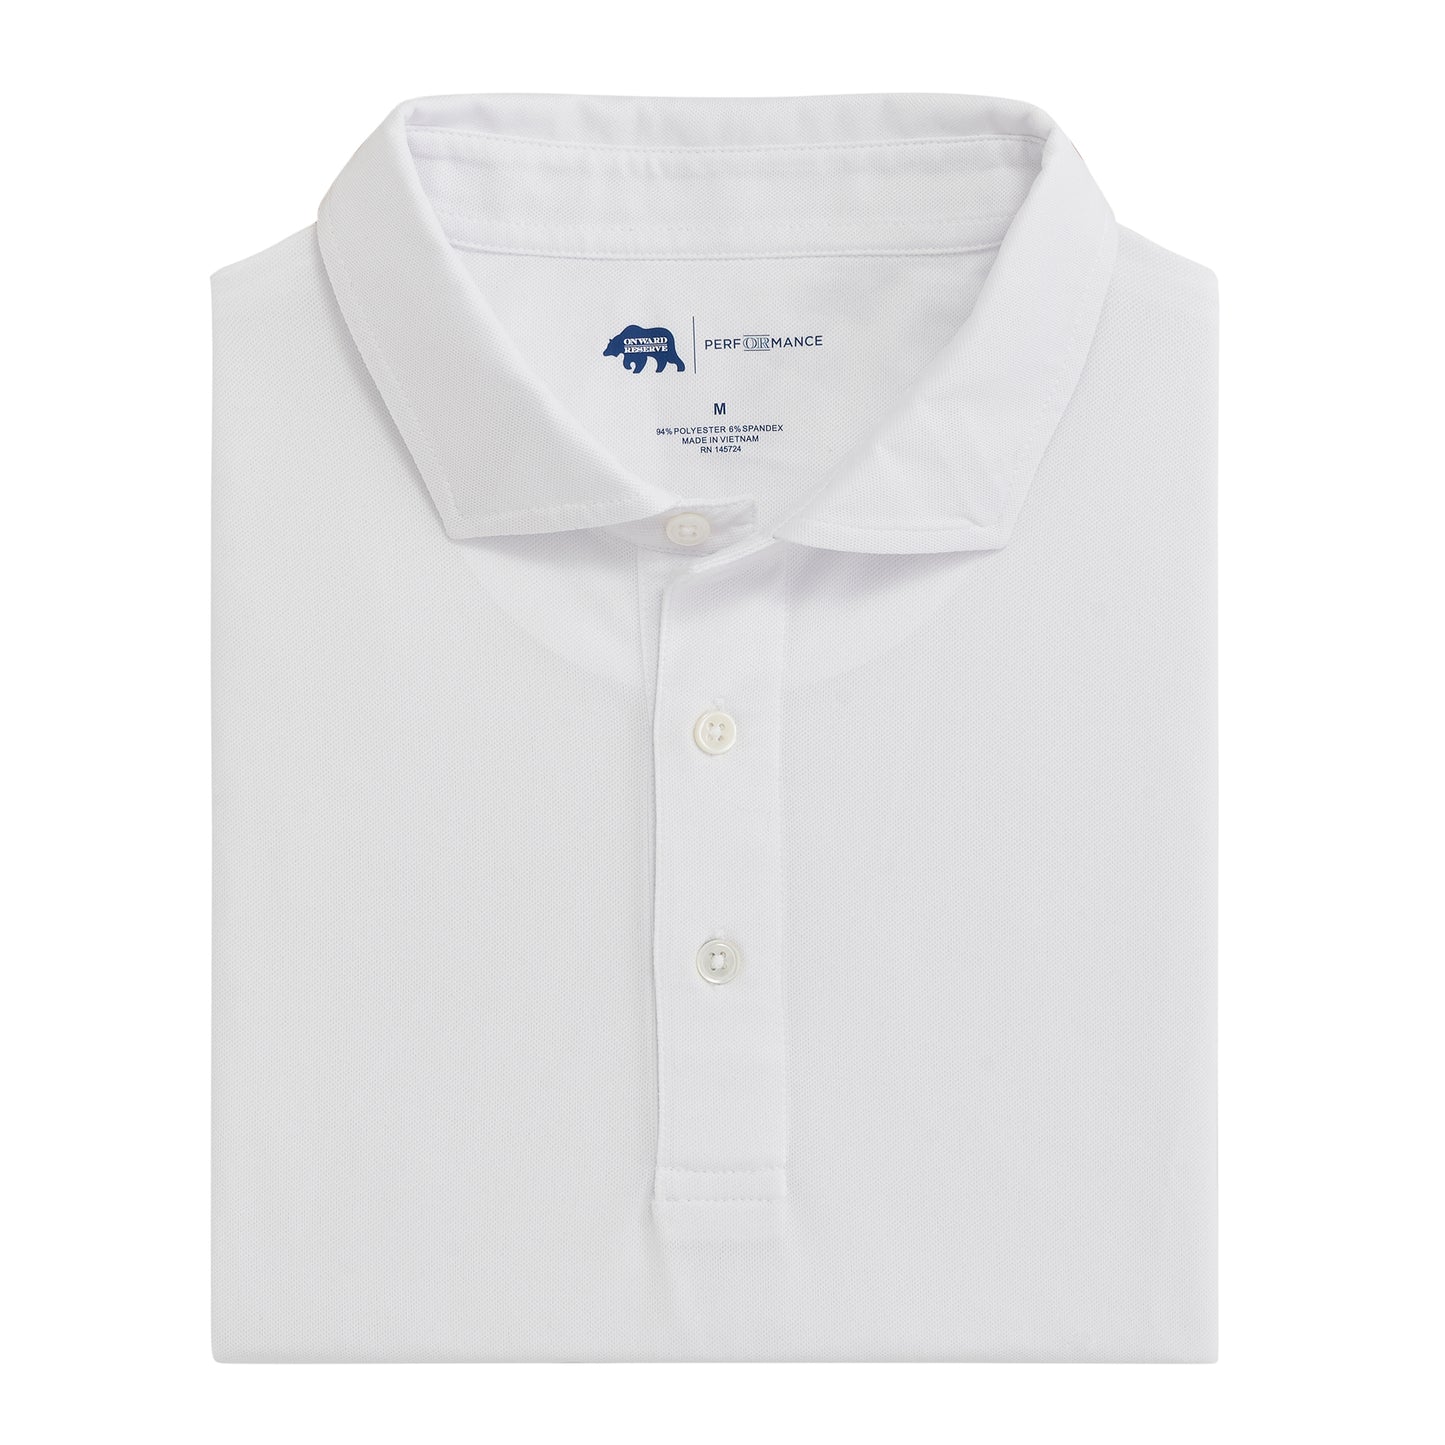 Solid Performance Pique Polo - White